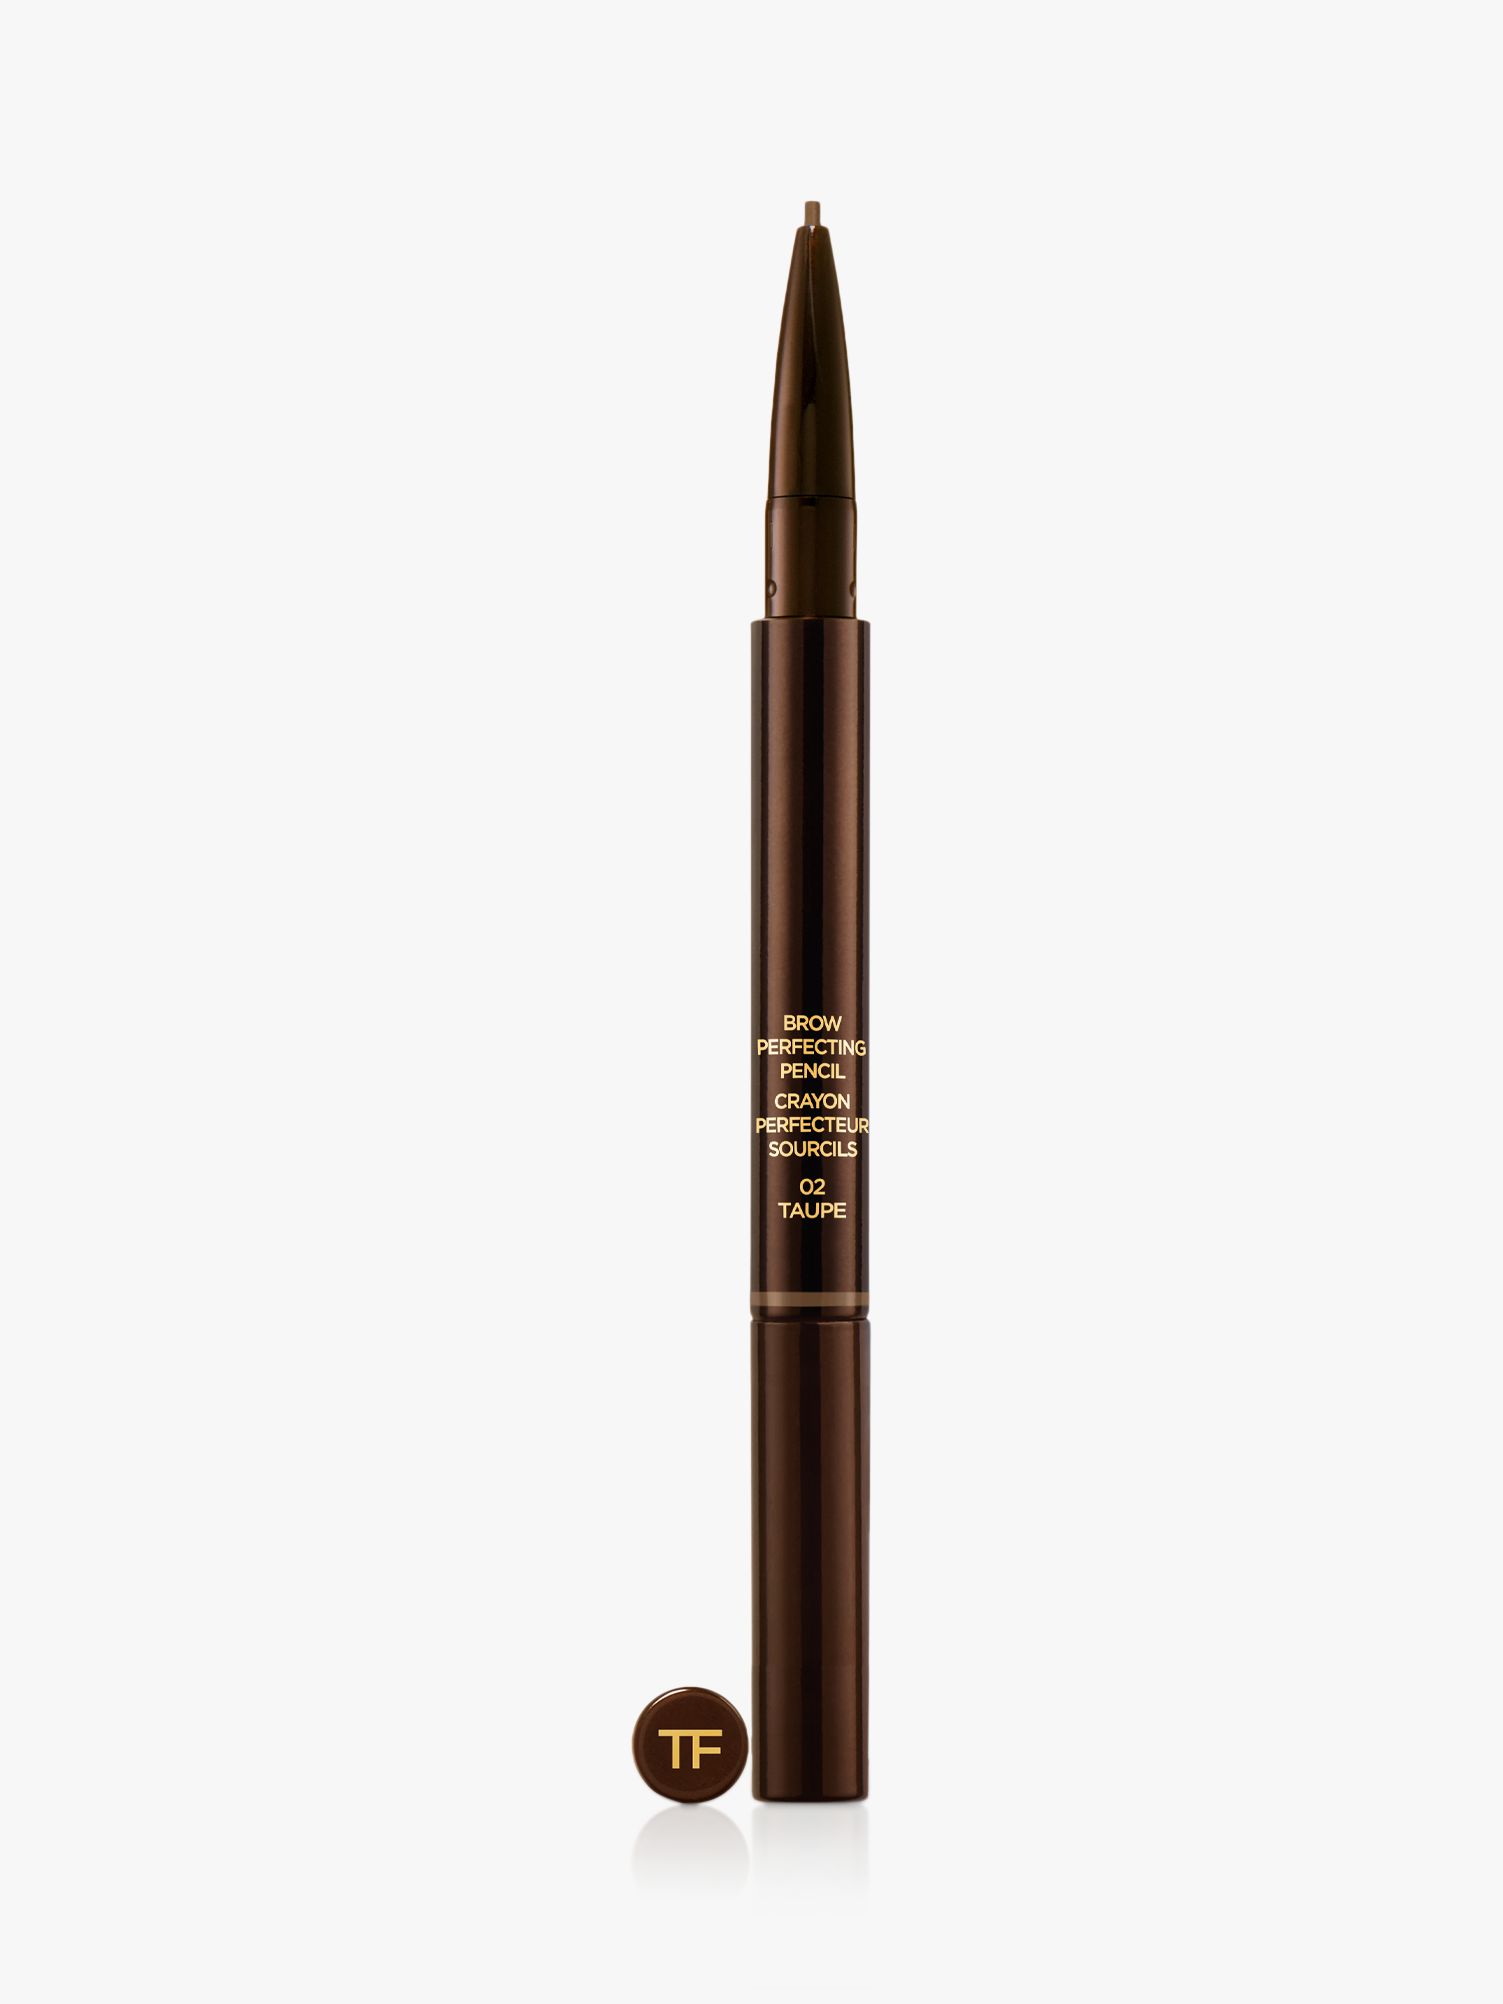 TOM FORD Brow Perfecting Pencil, 02 Taupe at John Lewis & Partners